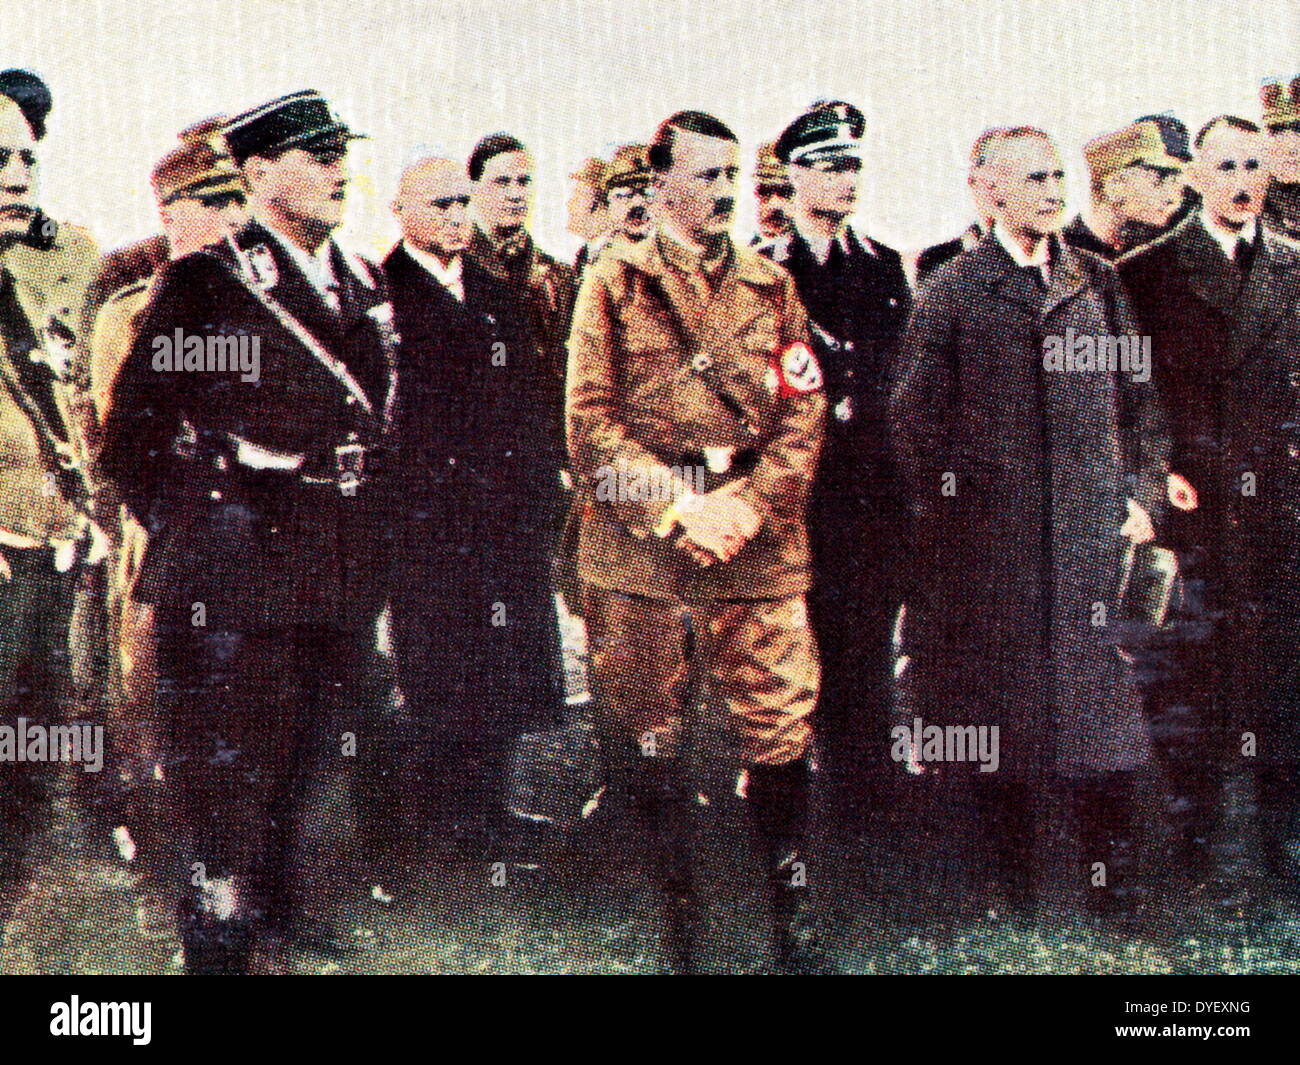 Adolf Hitler arrives in Munich 1933-34. Rudolf hess is shown to the right of Hitler Stock Photo